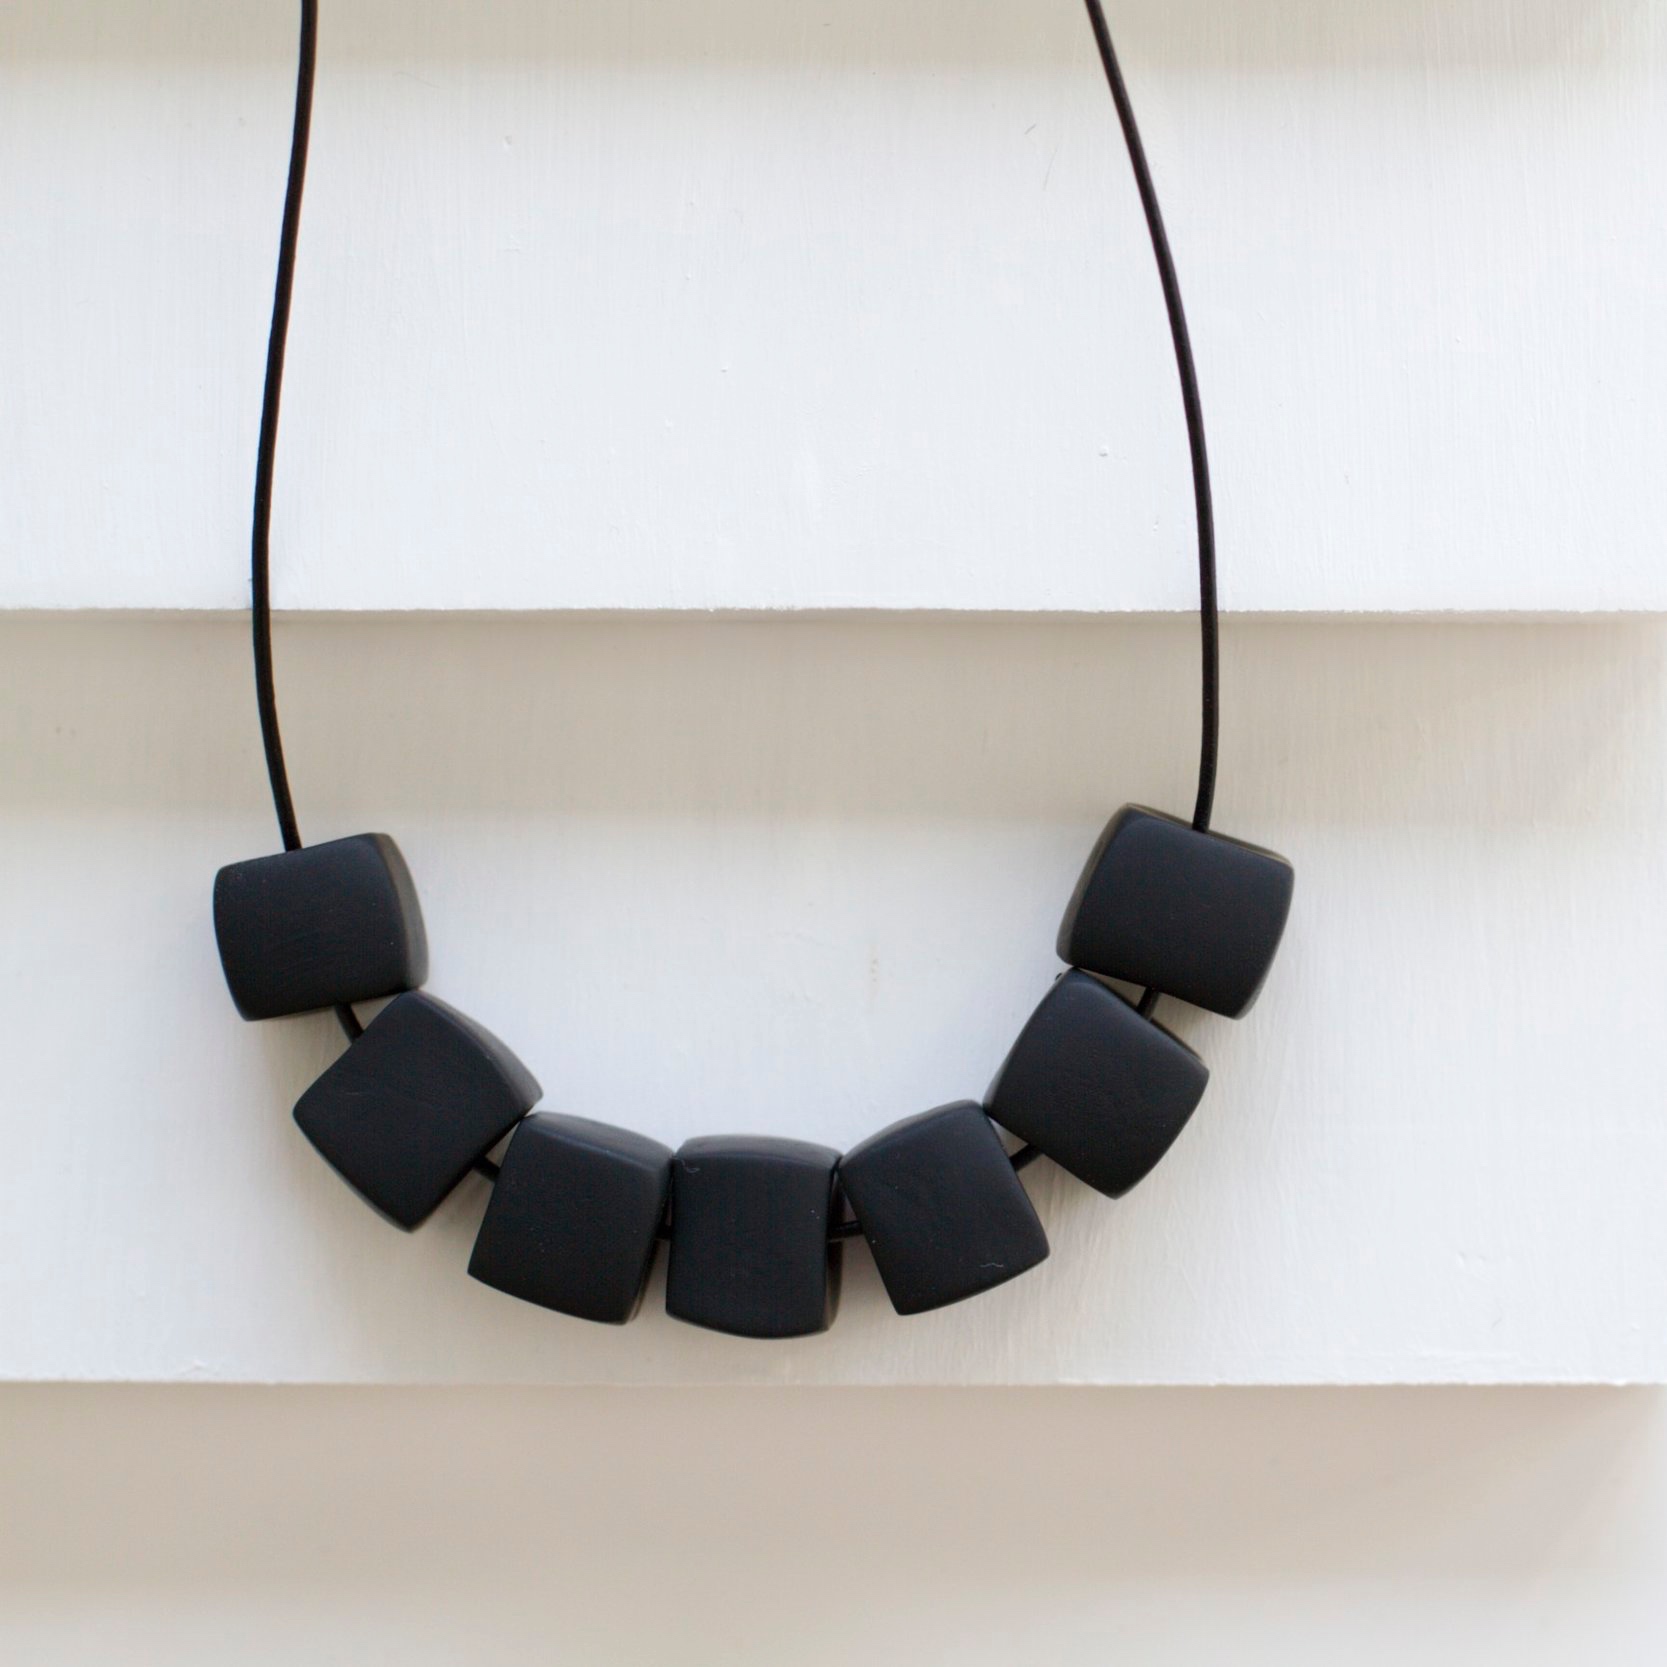 Polymer Clay Necklace wIth Black Leather Cord